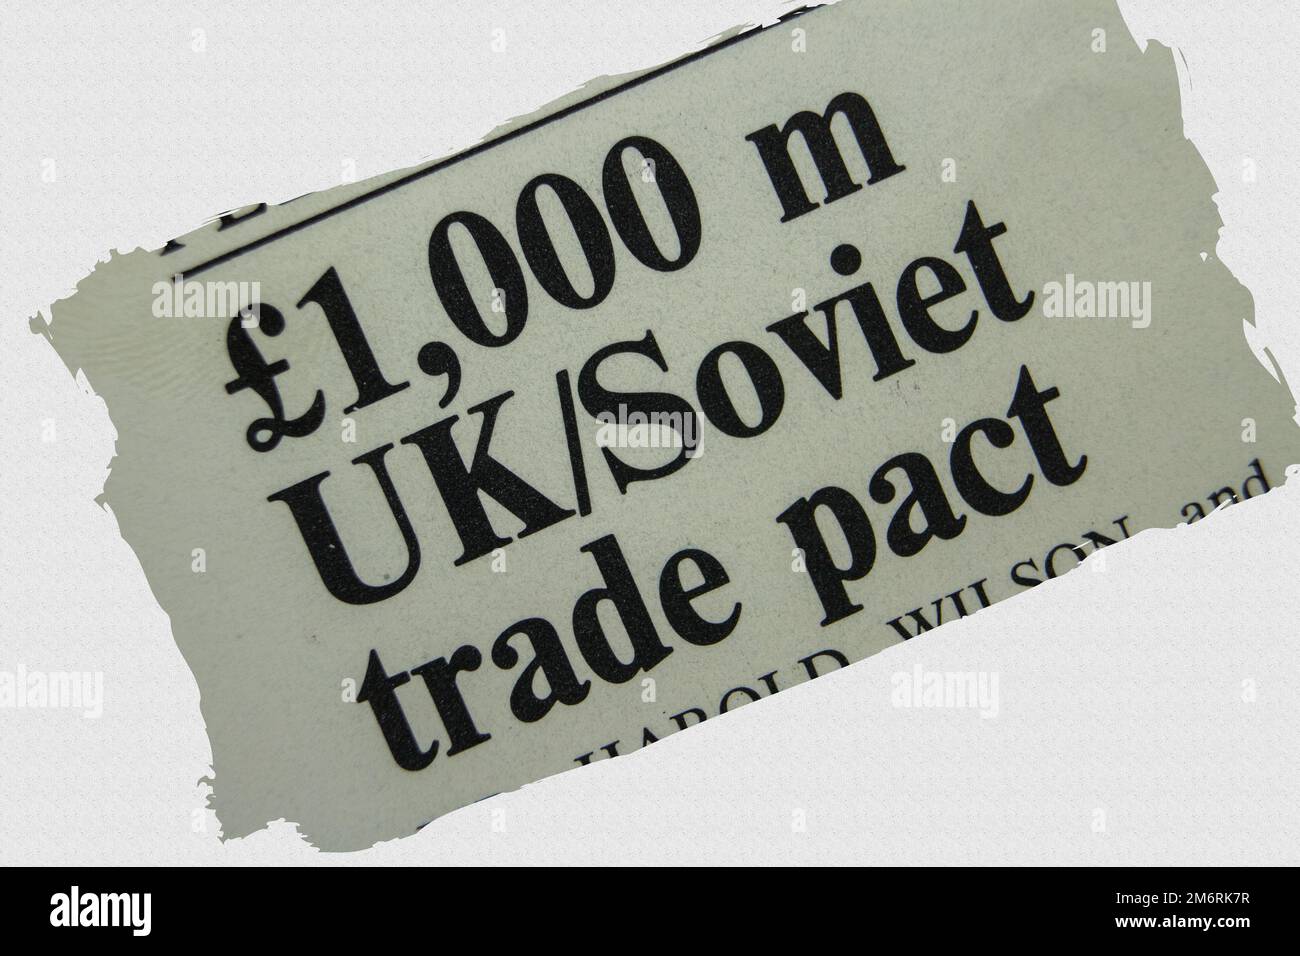 £1,000 m UK - Soviet trade pact - news story from 1975 newspaper headline article title with overlay Stock Photo